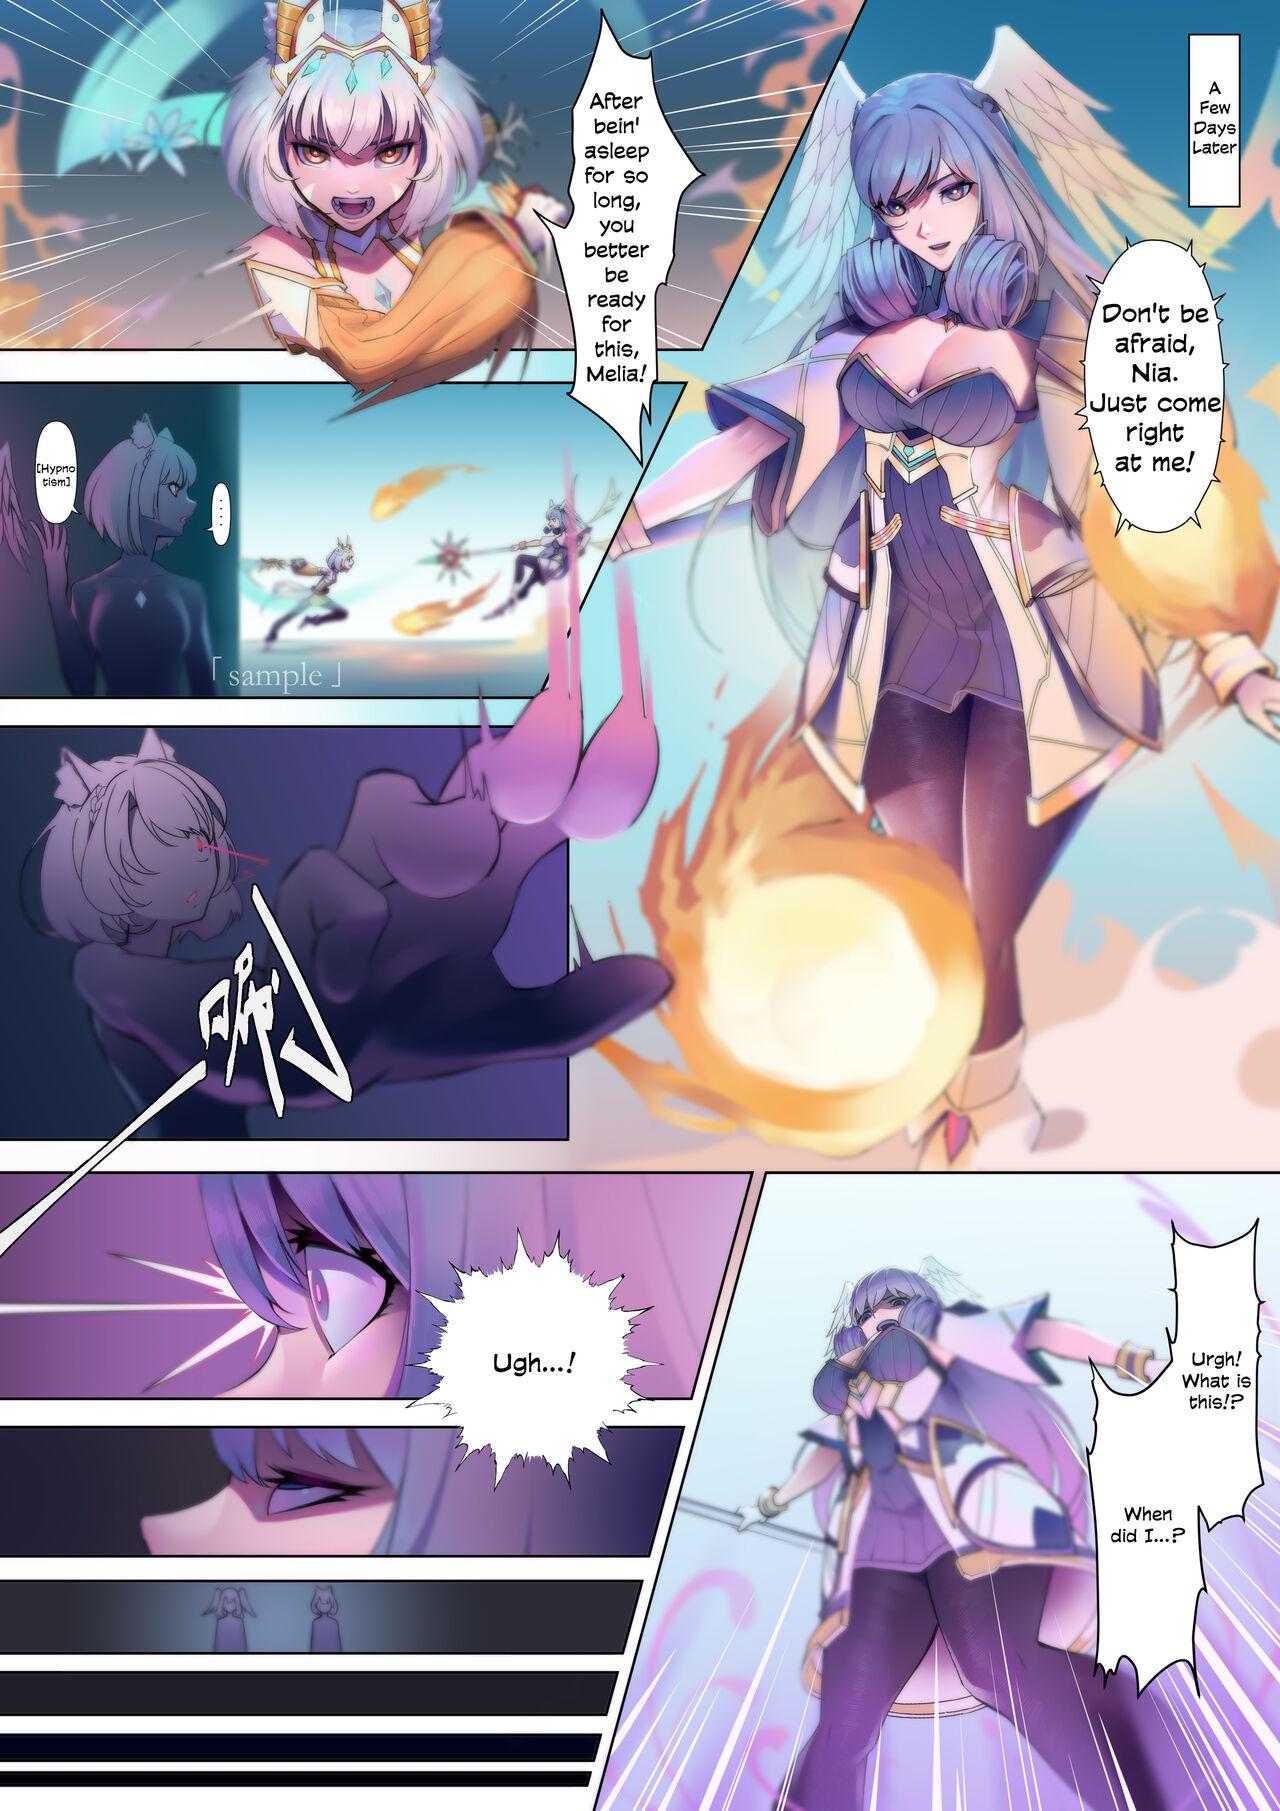 Stepmom 《Xe○blade3》Doujinshi Request - Xenoblade chronicles 3 Chilena - Page 5